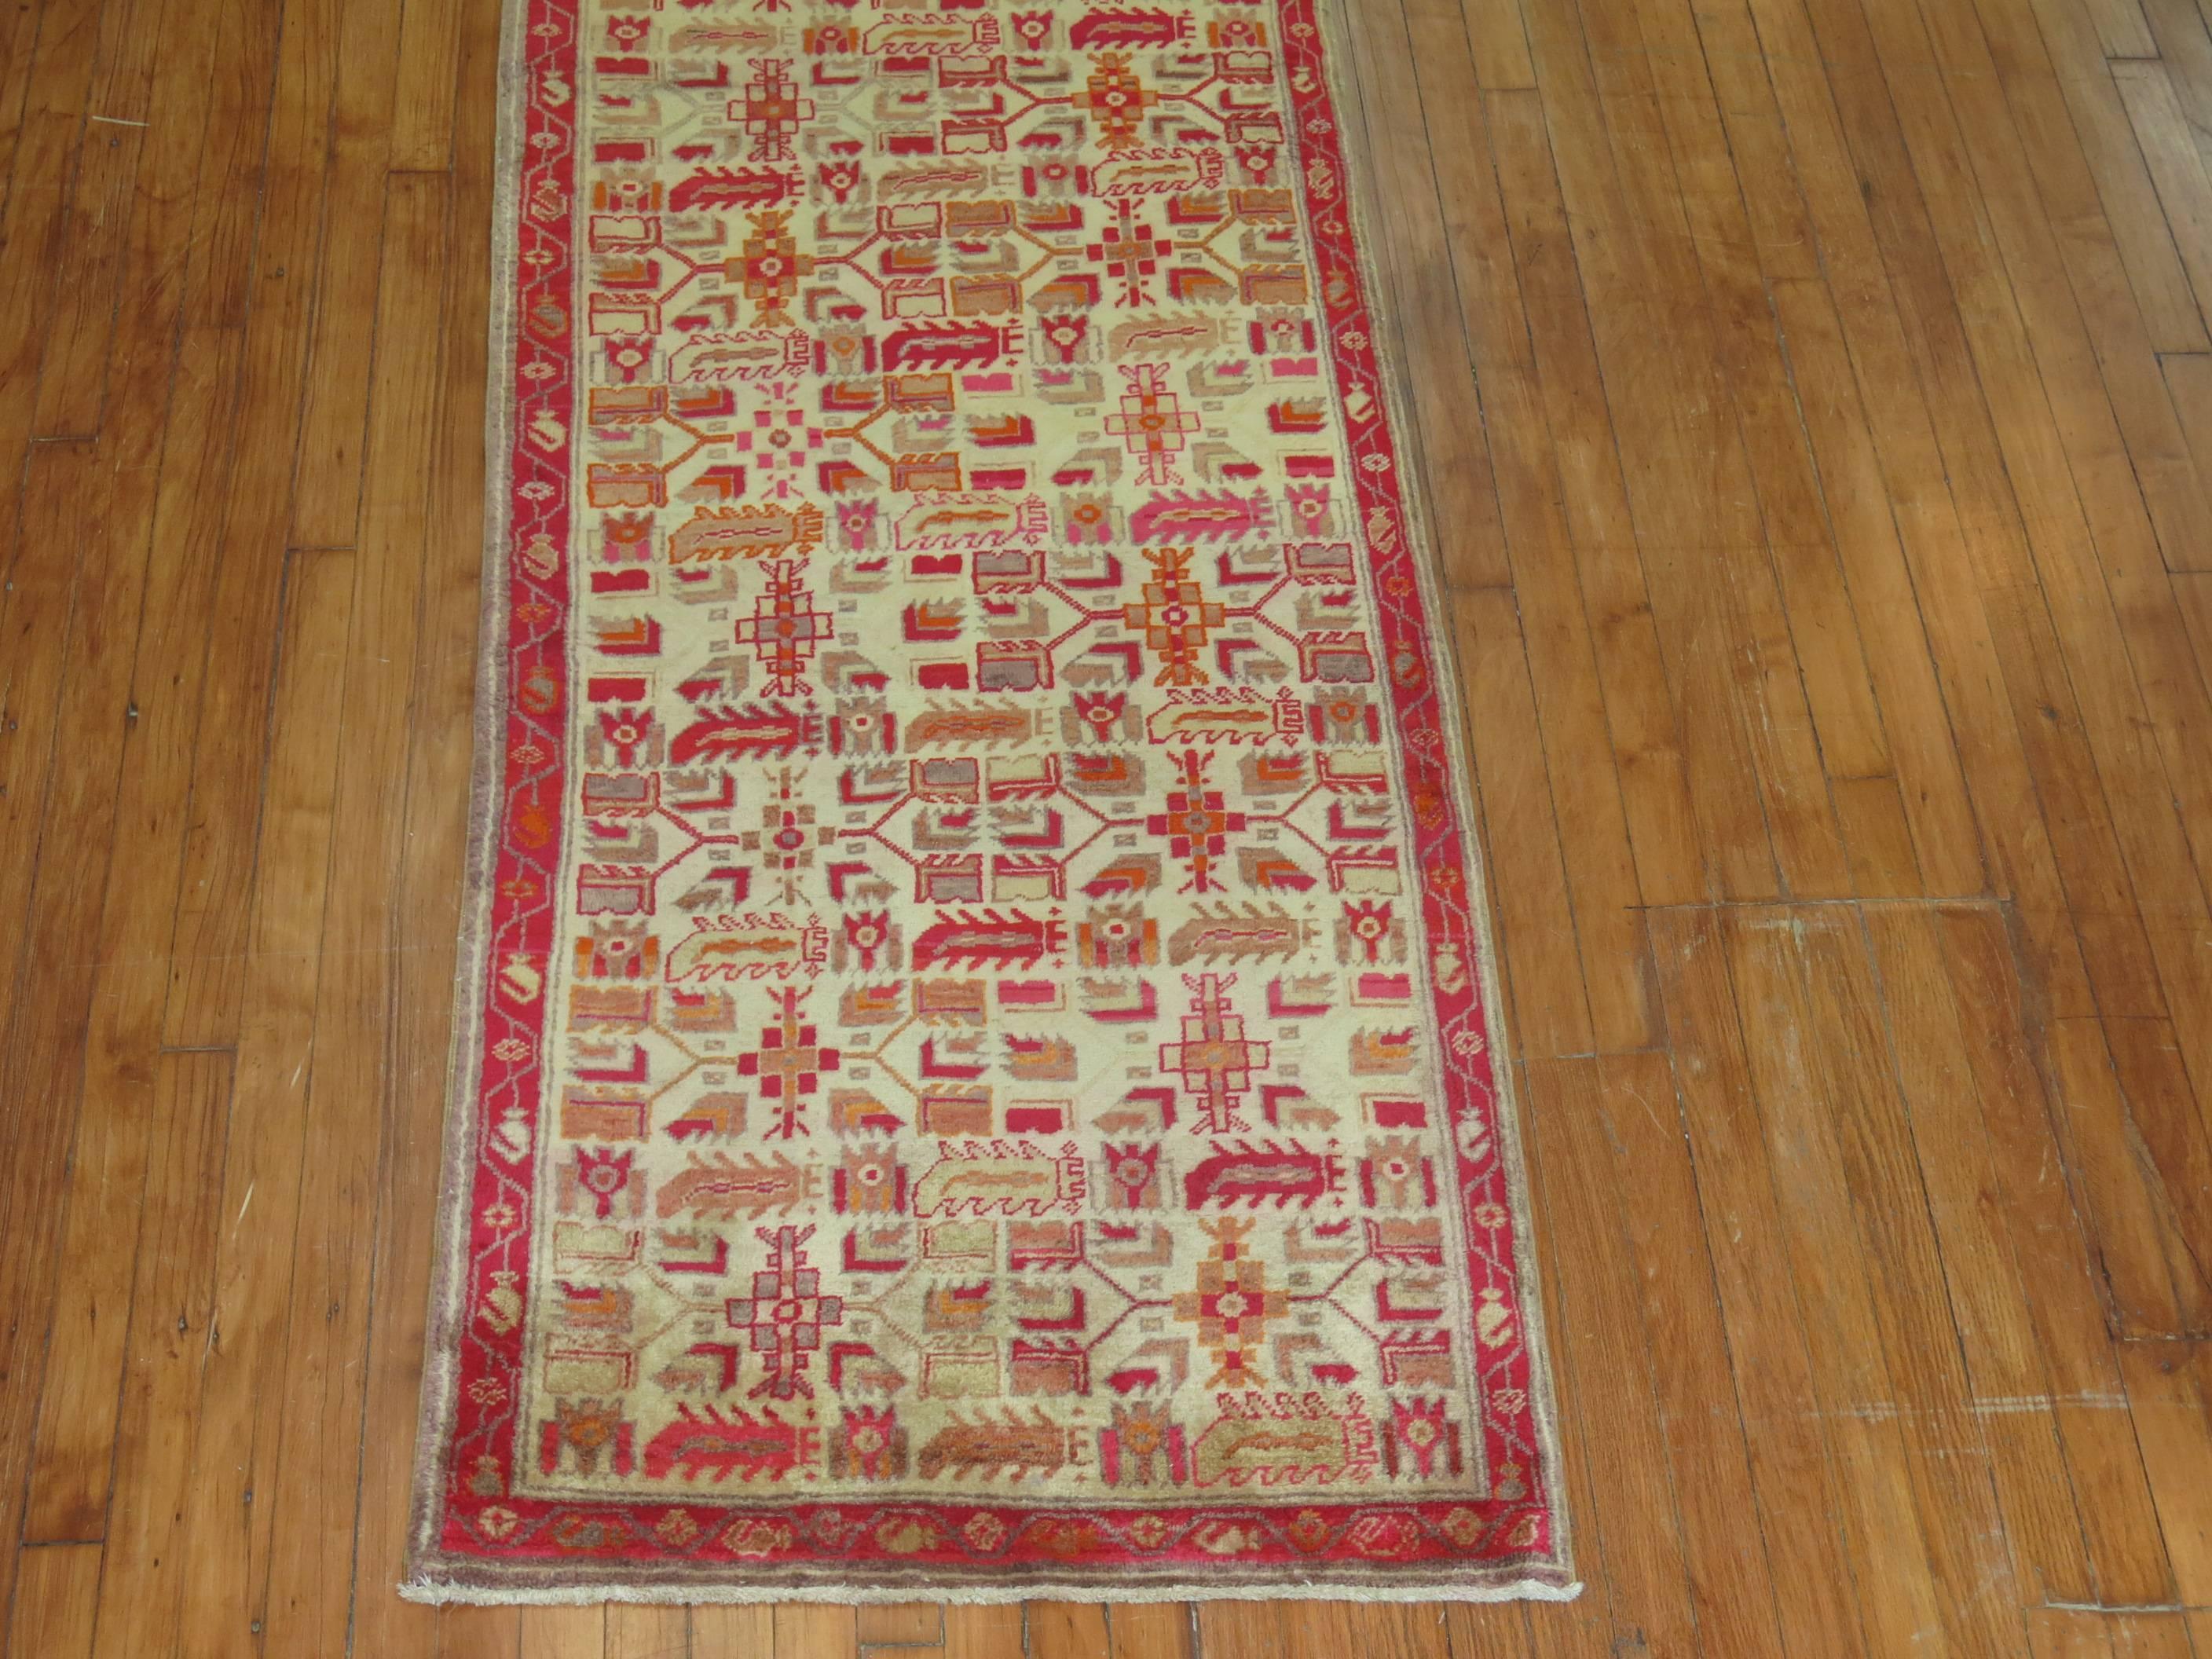  A Turkish runner with predominant accents in red, orange, and ivory from the mid-20th century

measures: 2'8